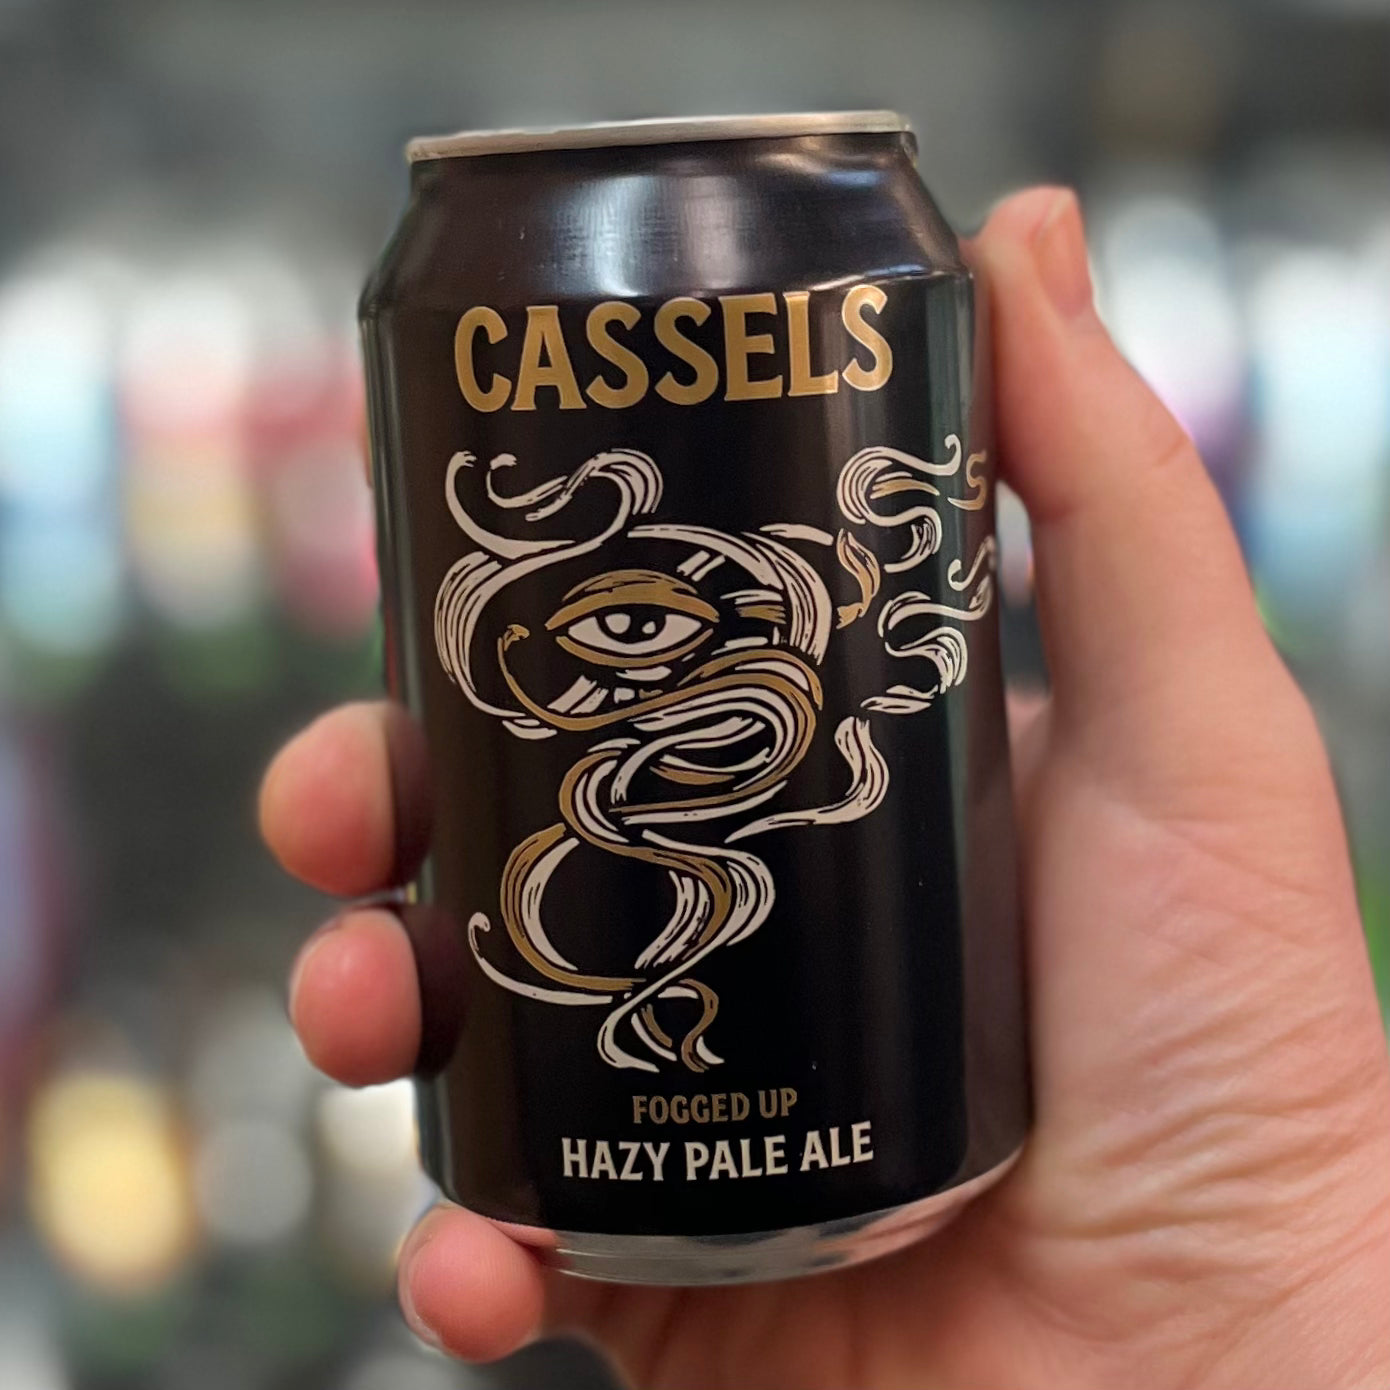 Cassels Fogged Up Hazy Pale Ale